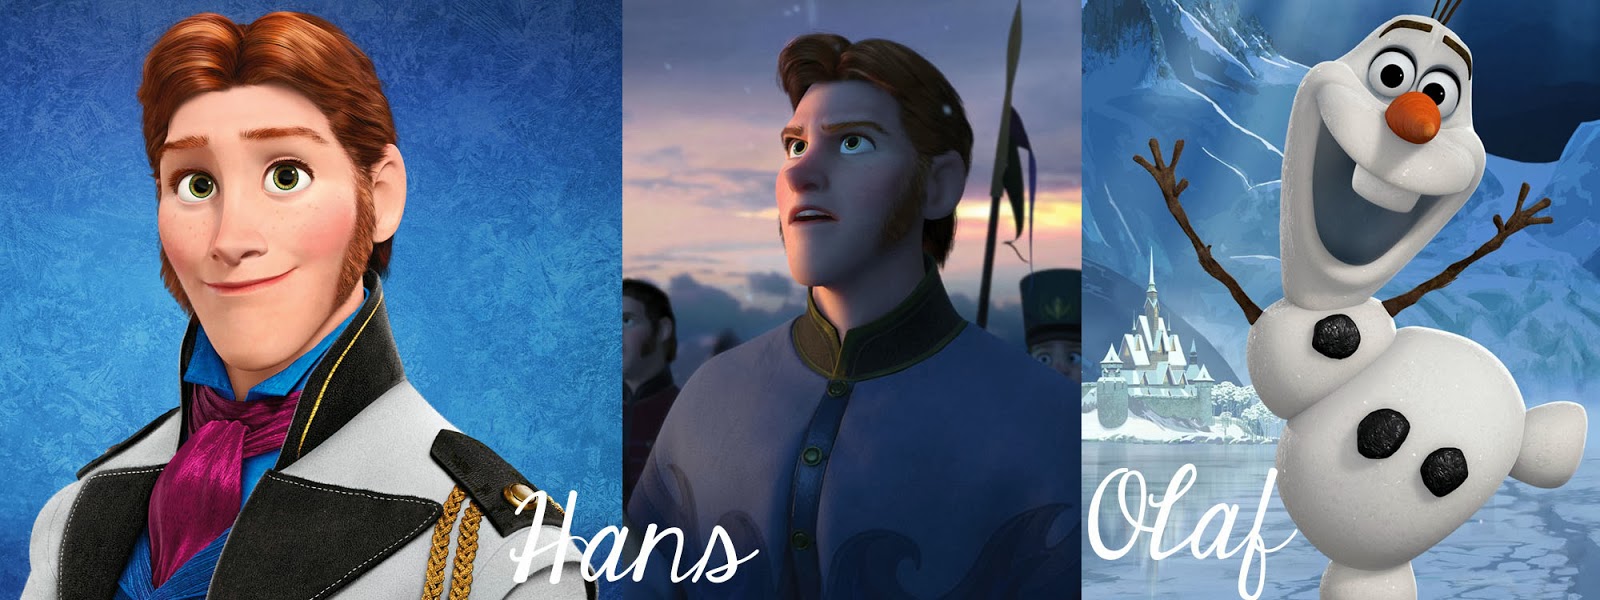 Hans From Frozen Quotes.